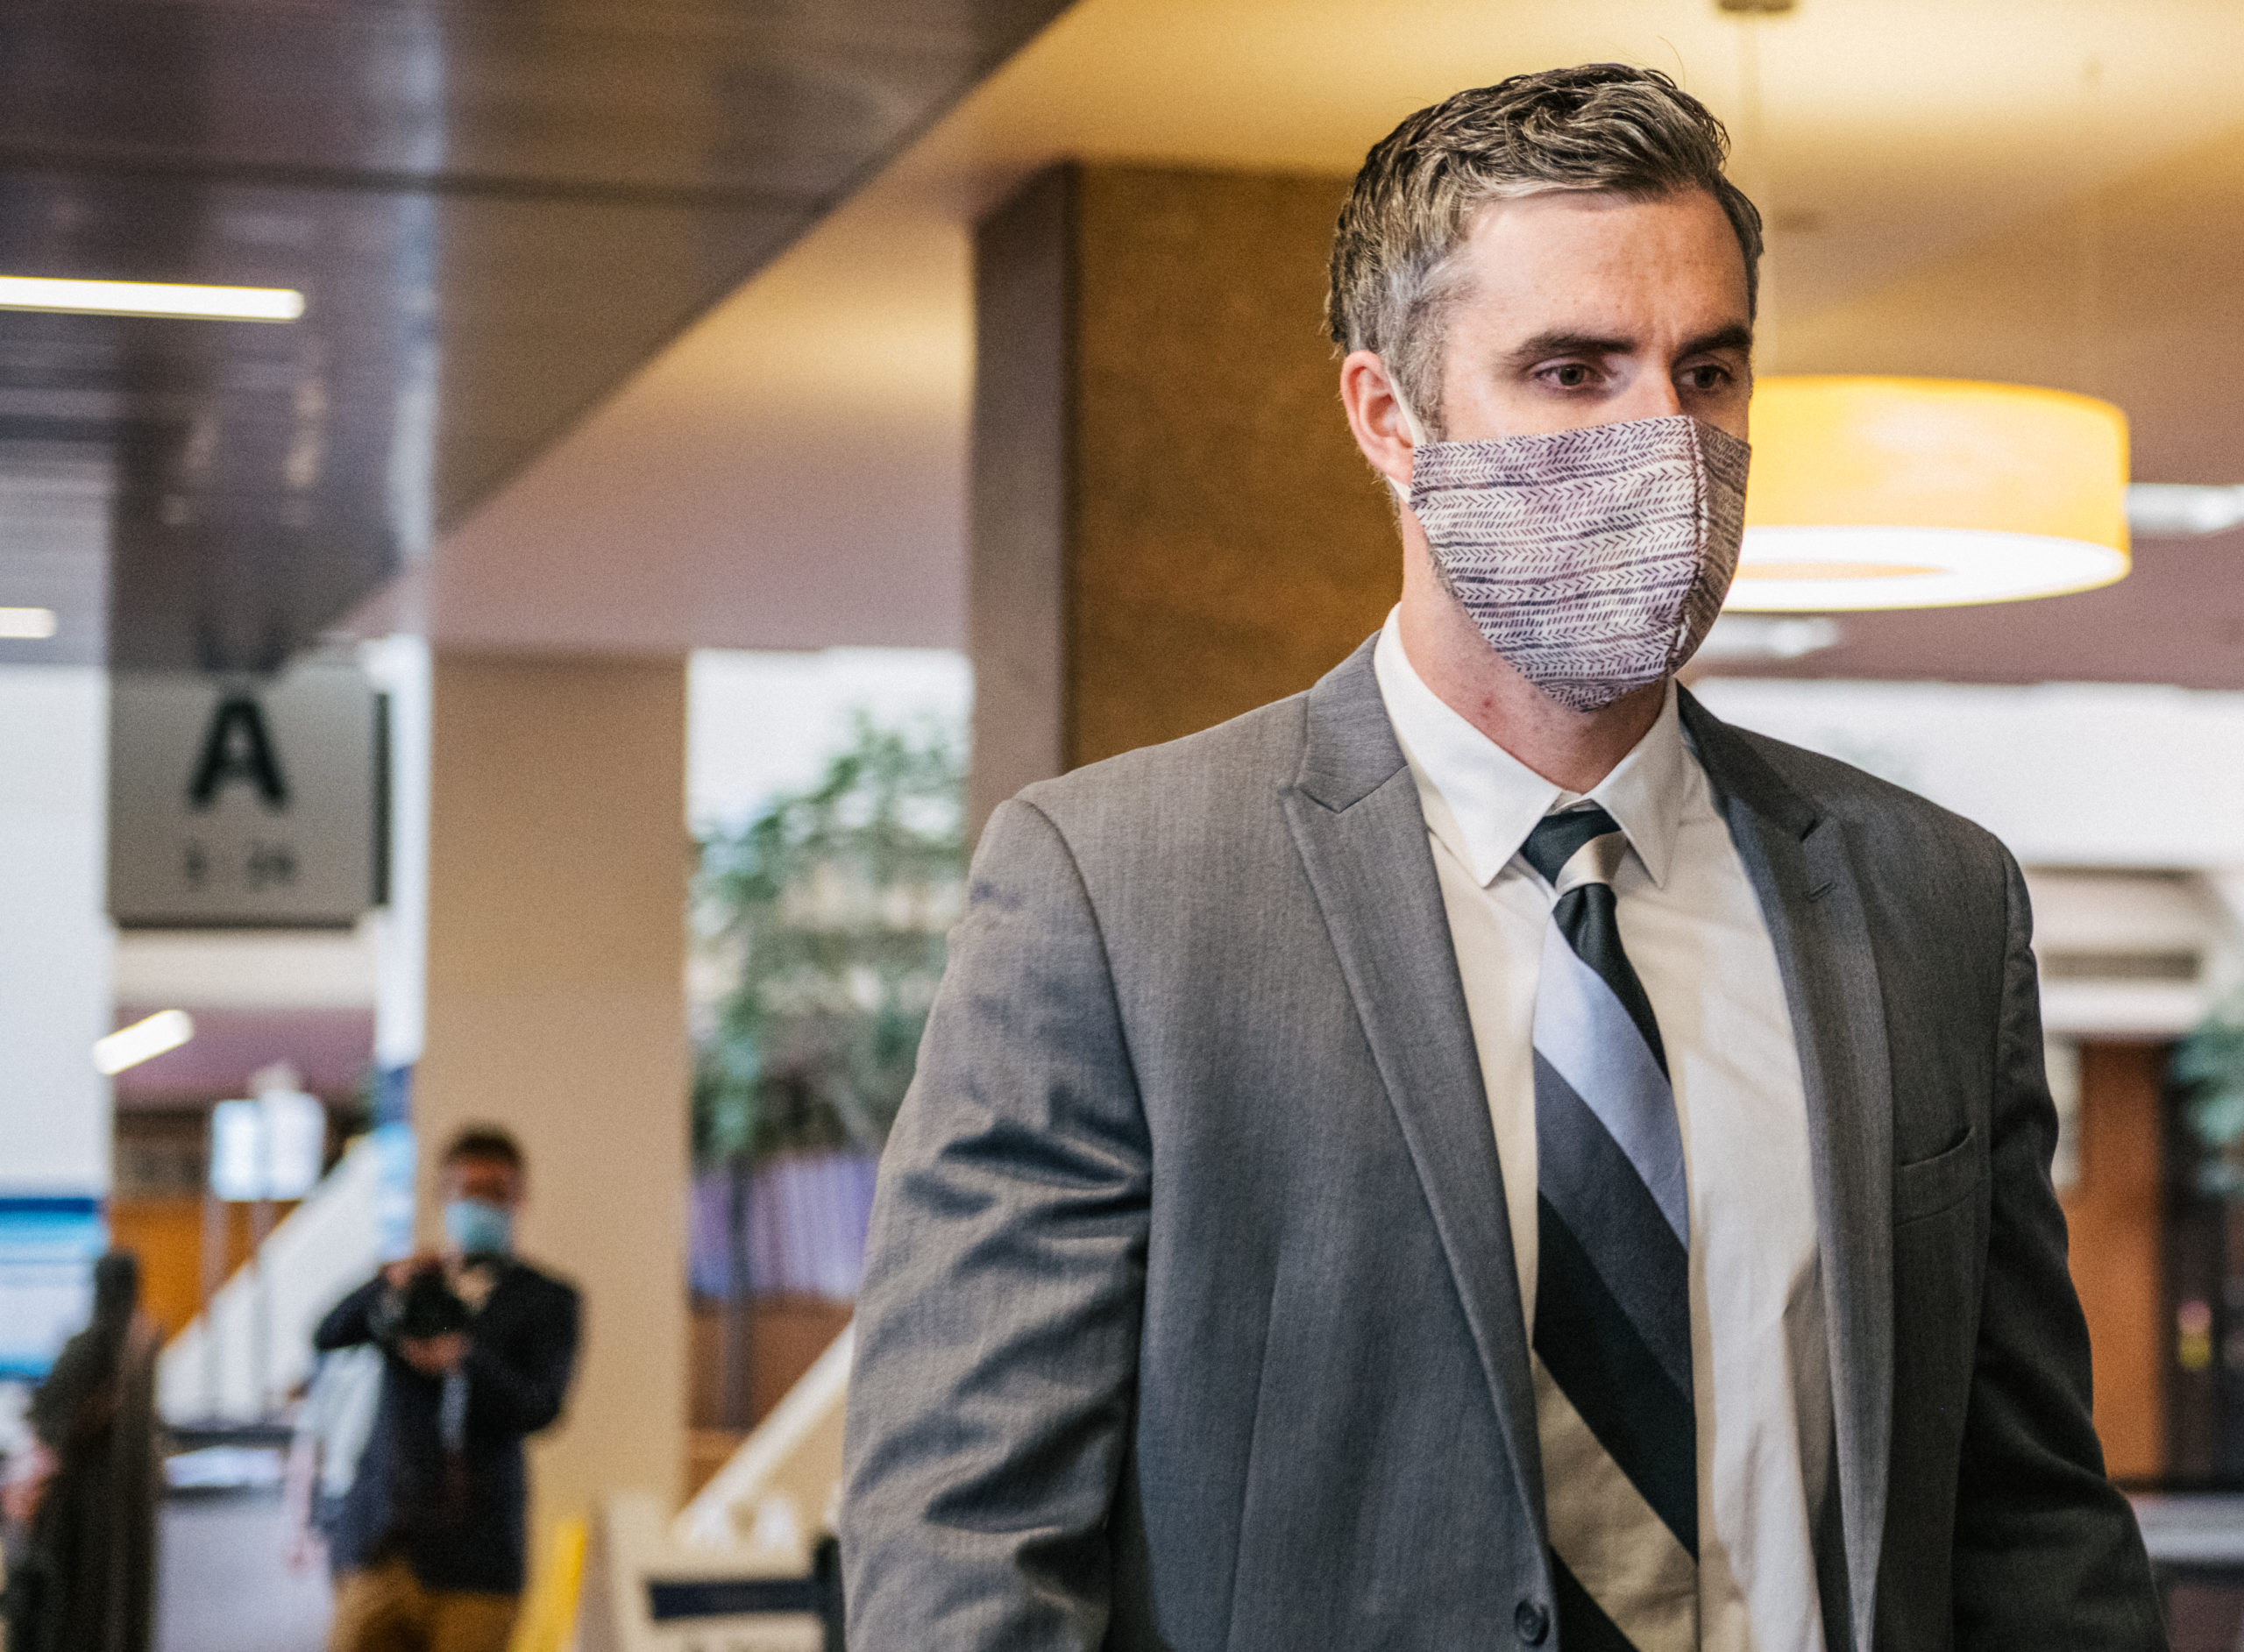 Former Minneapolis police officer Thomas Lane passes through the A-tower public entrance, ahead of a courthouse appearance, at the Hennepin County Government Center on July 21, 2020 in Minneapolis, Minnesota. (Brandon Bell/Getty Images)